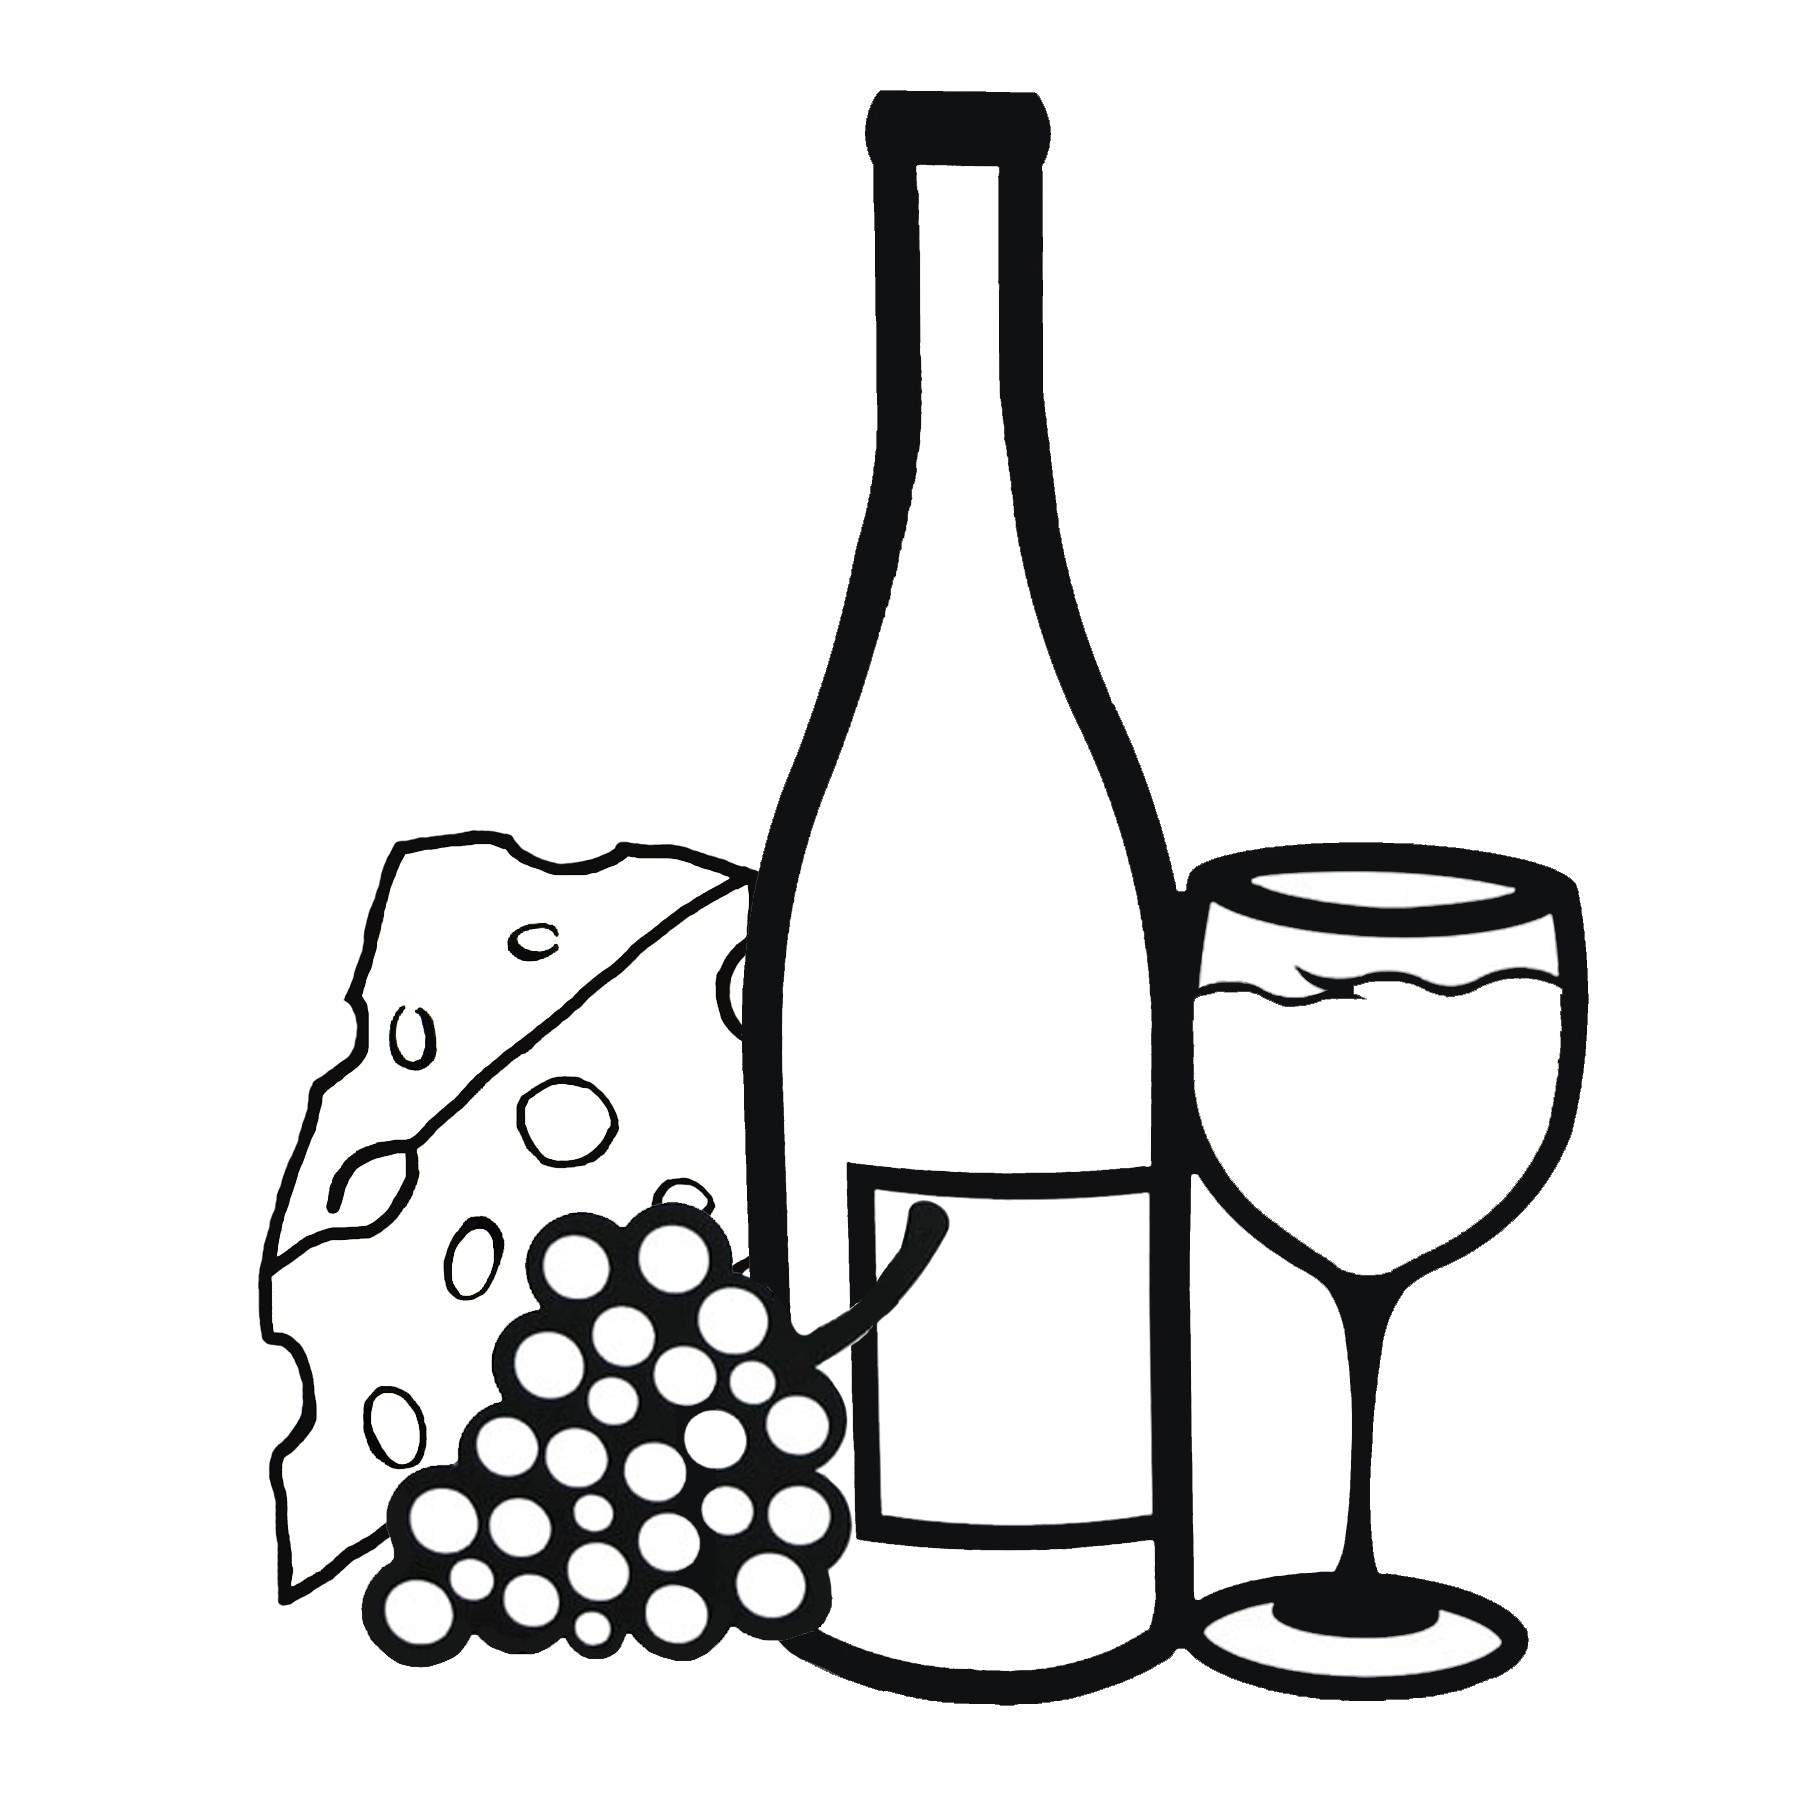 Wine Bottle, Glass , Grapes and Cheese - Quest Aerospace